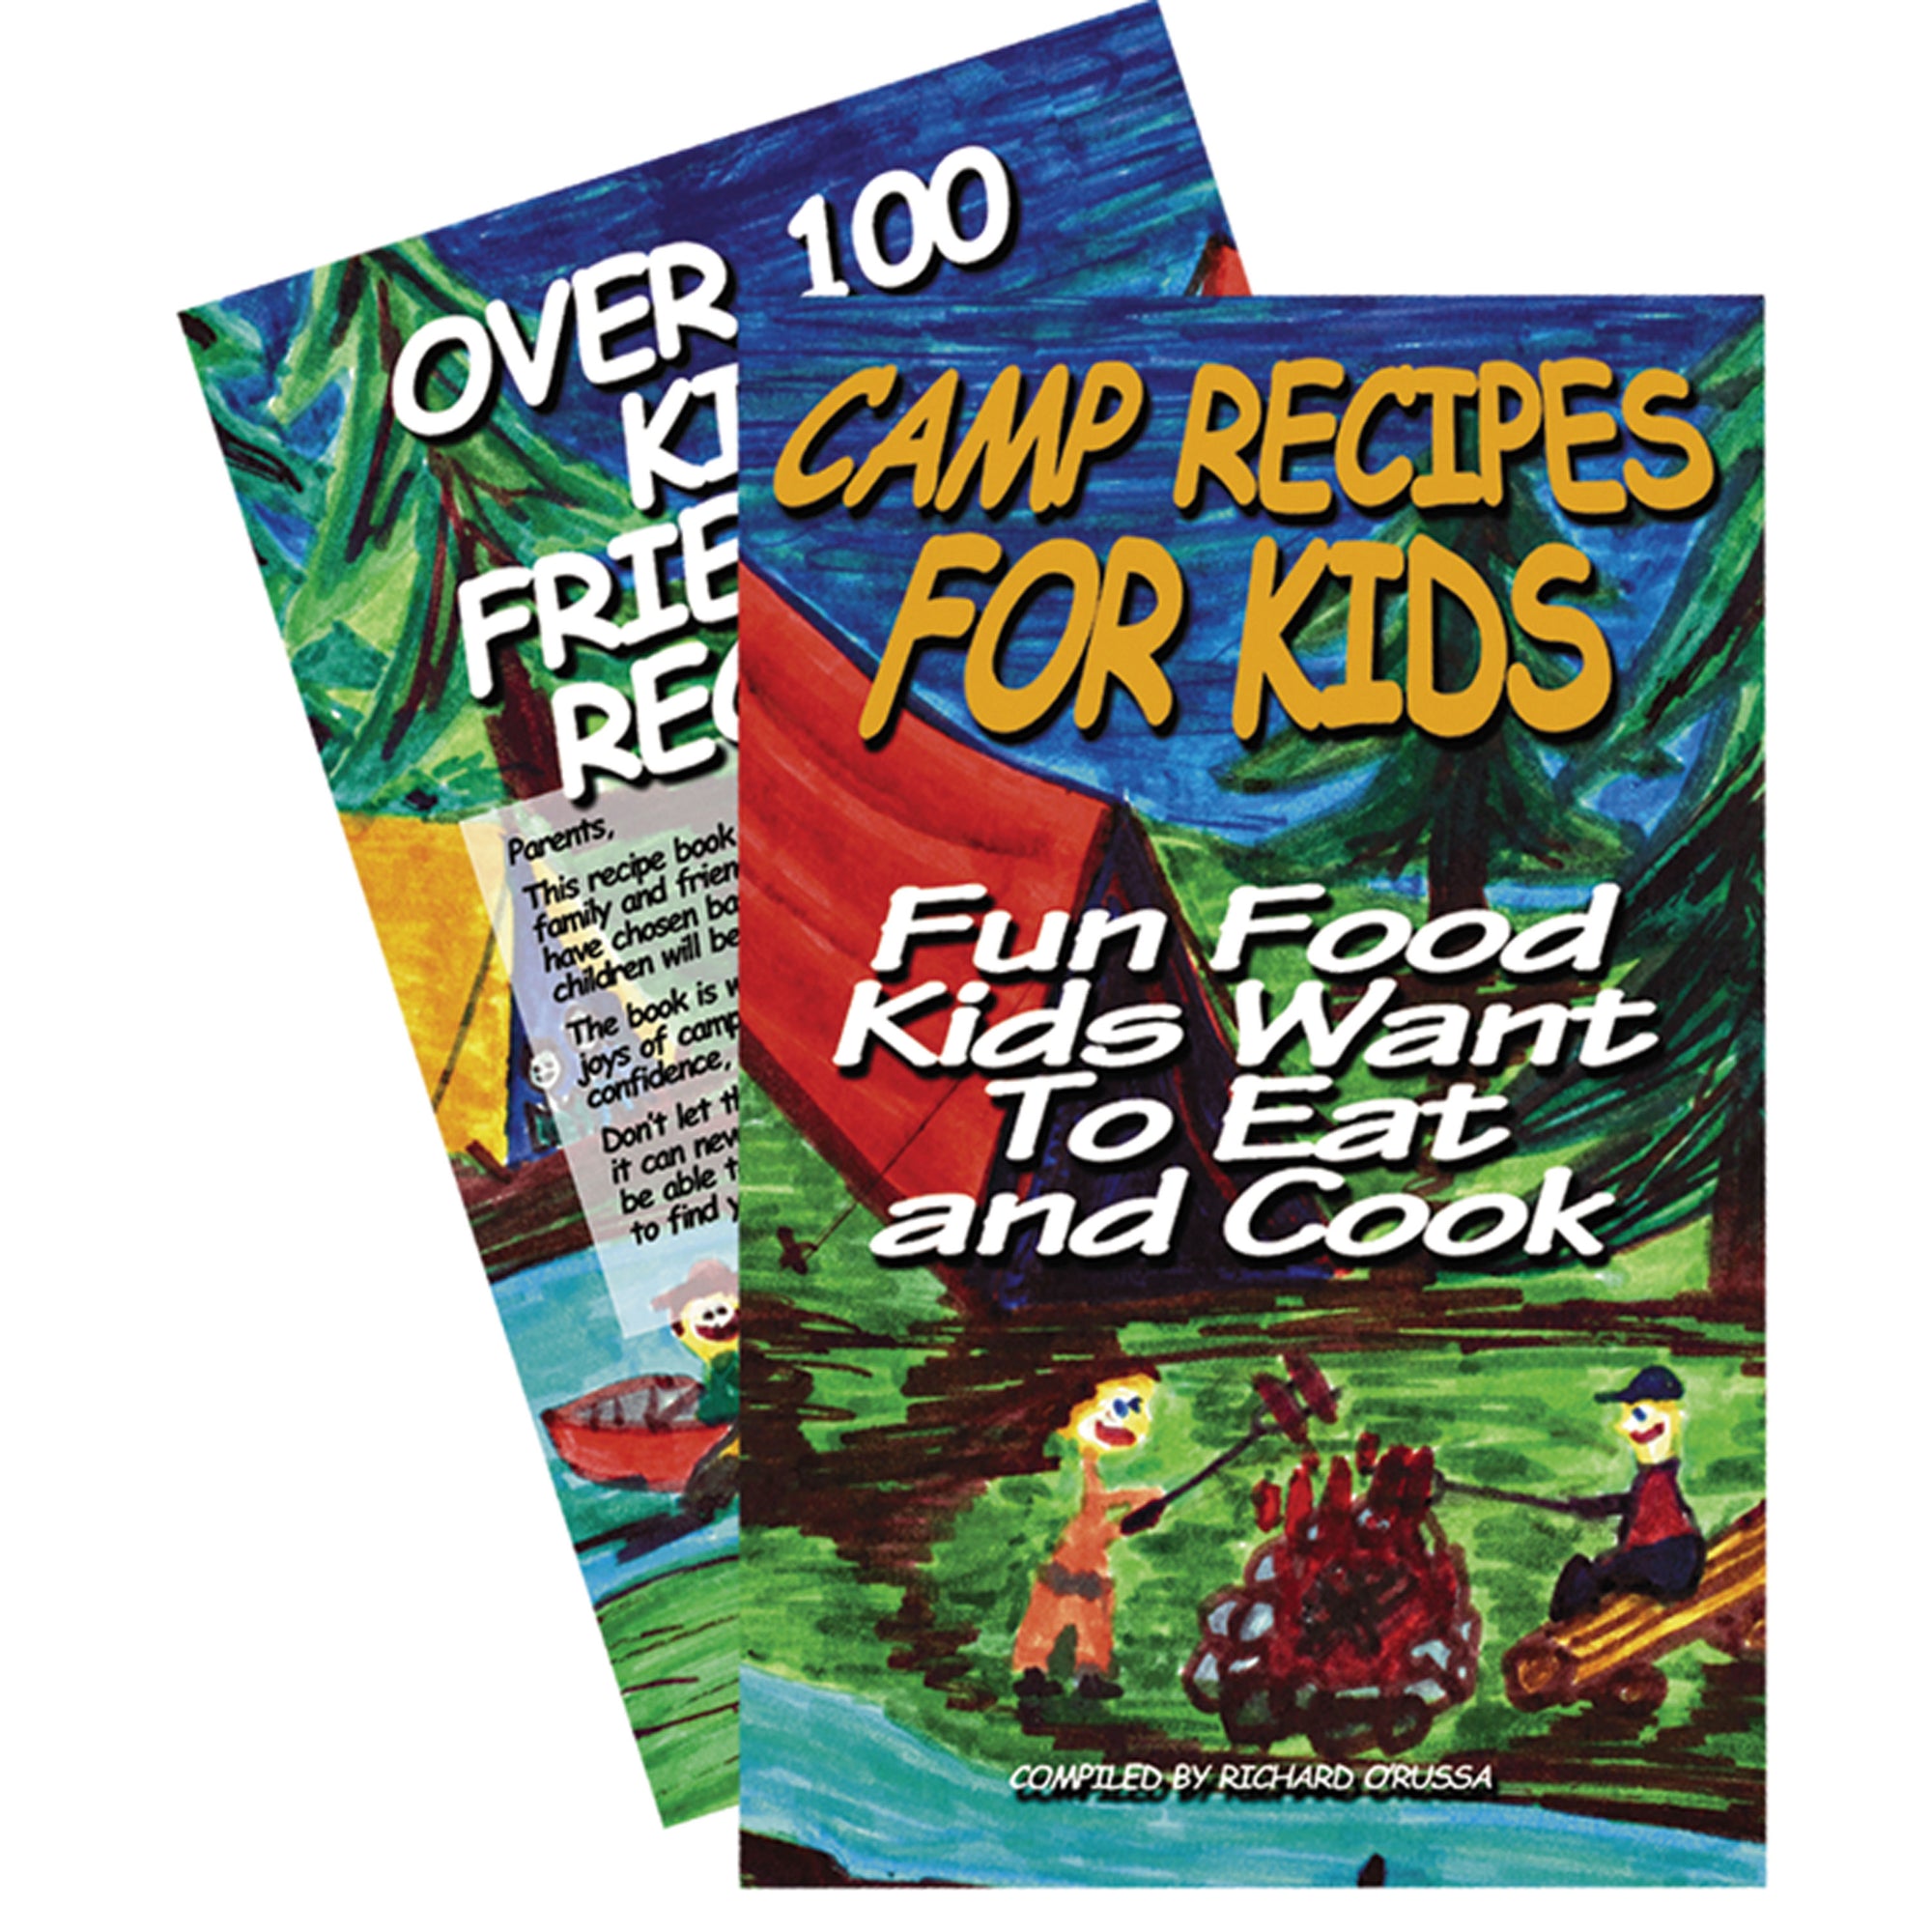 Rome Industries 2015 Camp Recipes For Kids By Richard O'Russa